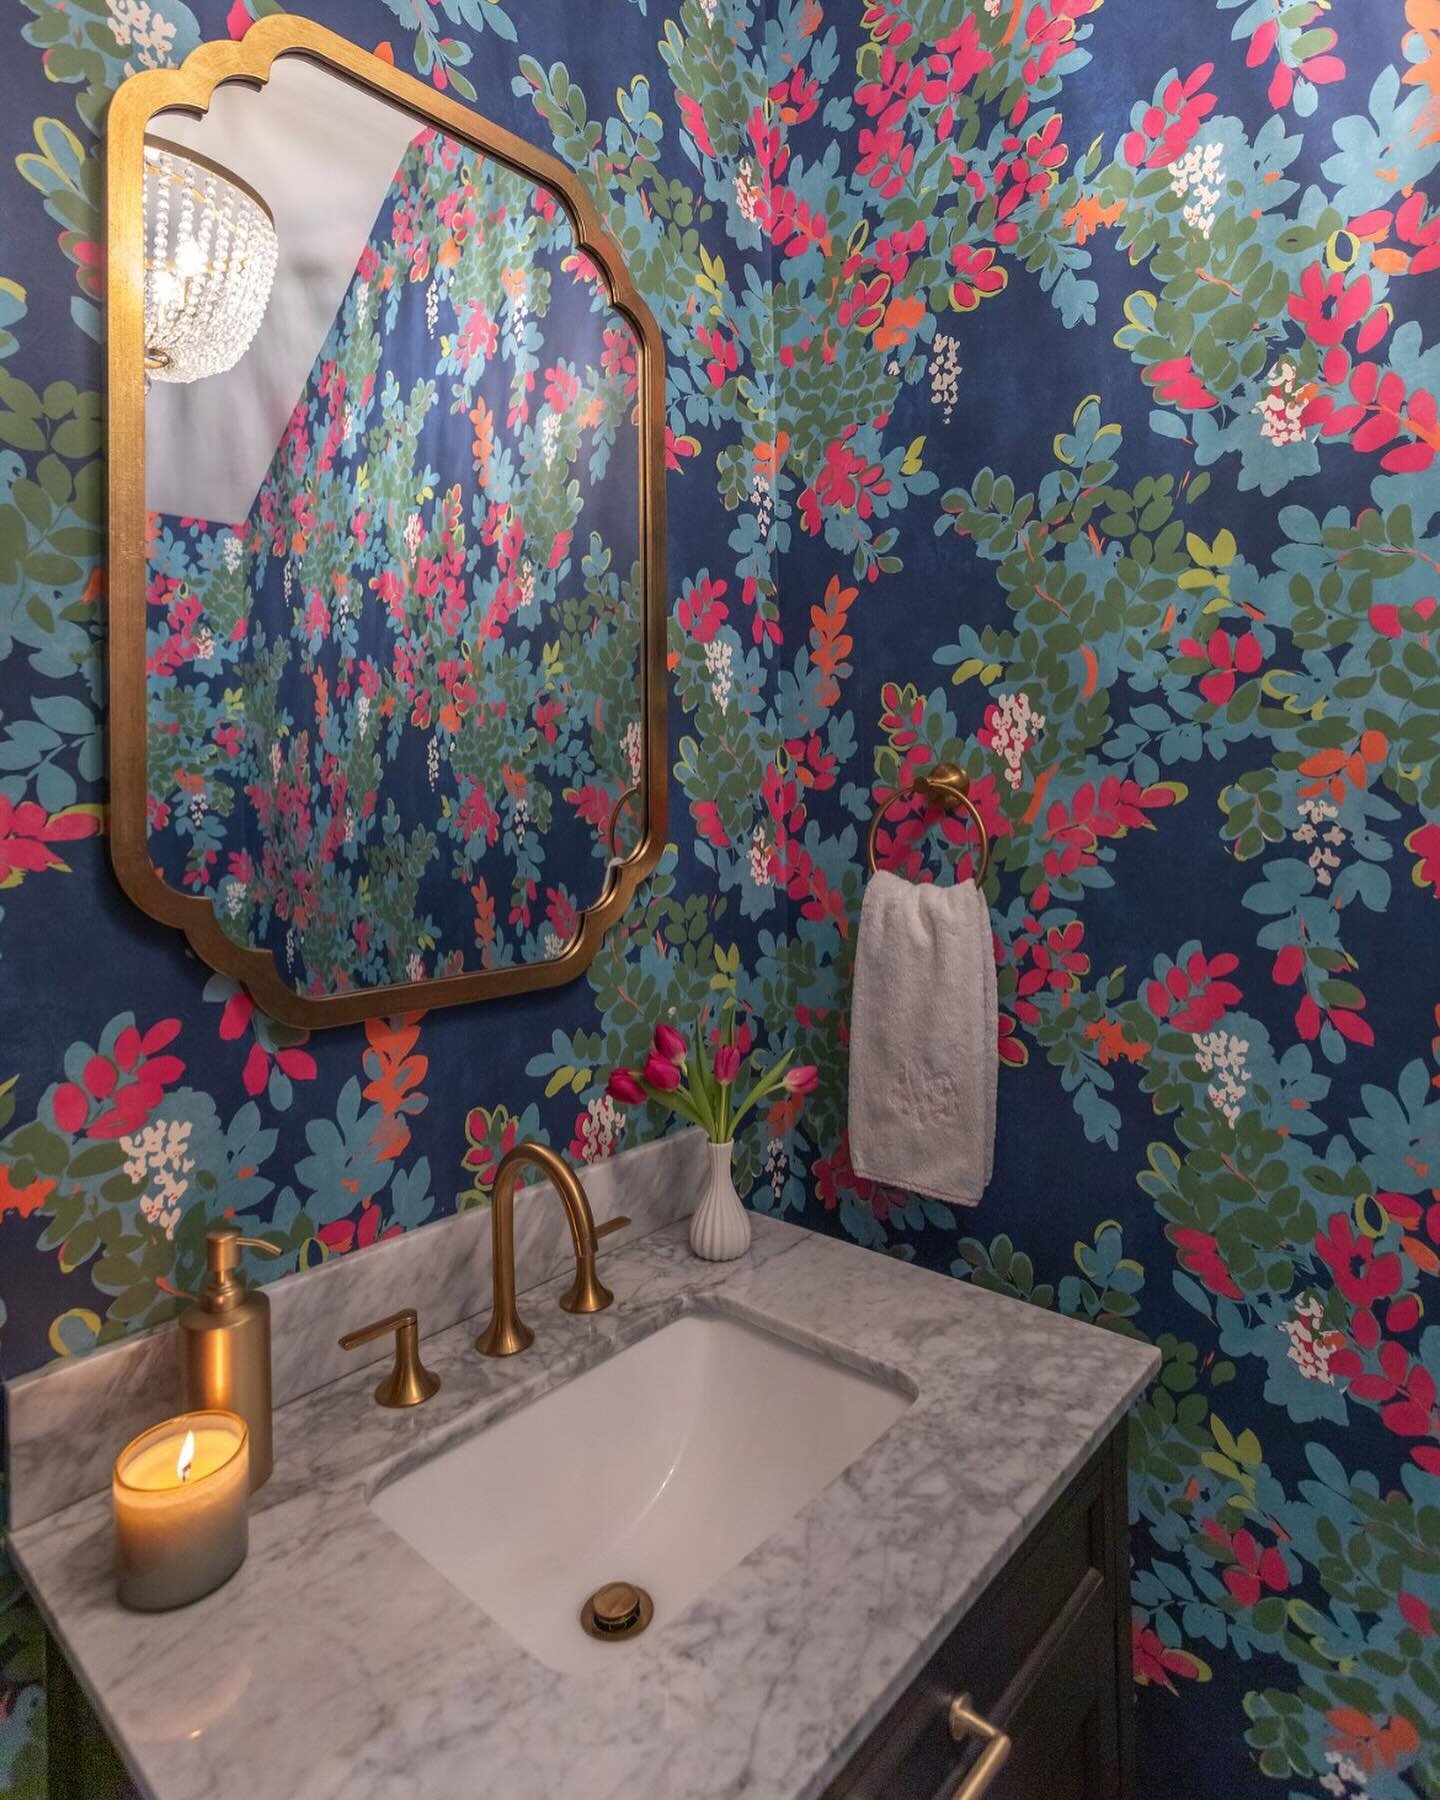 Powder room drama: this is it! We love a dramatic wallpaper in a powder room and our client, despite being a bit fearful of this wallpaper, trusted us&hellip;and boy did we deliver. The wallpaper, new mirror and the CHANDELIER! Coupled together, this